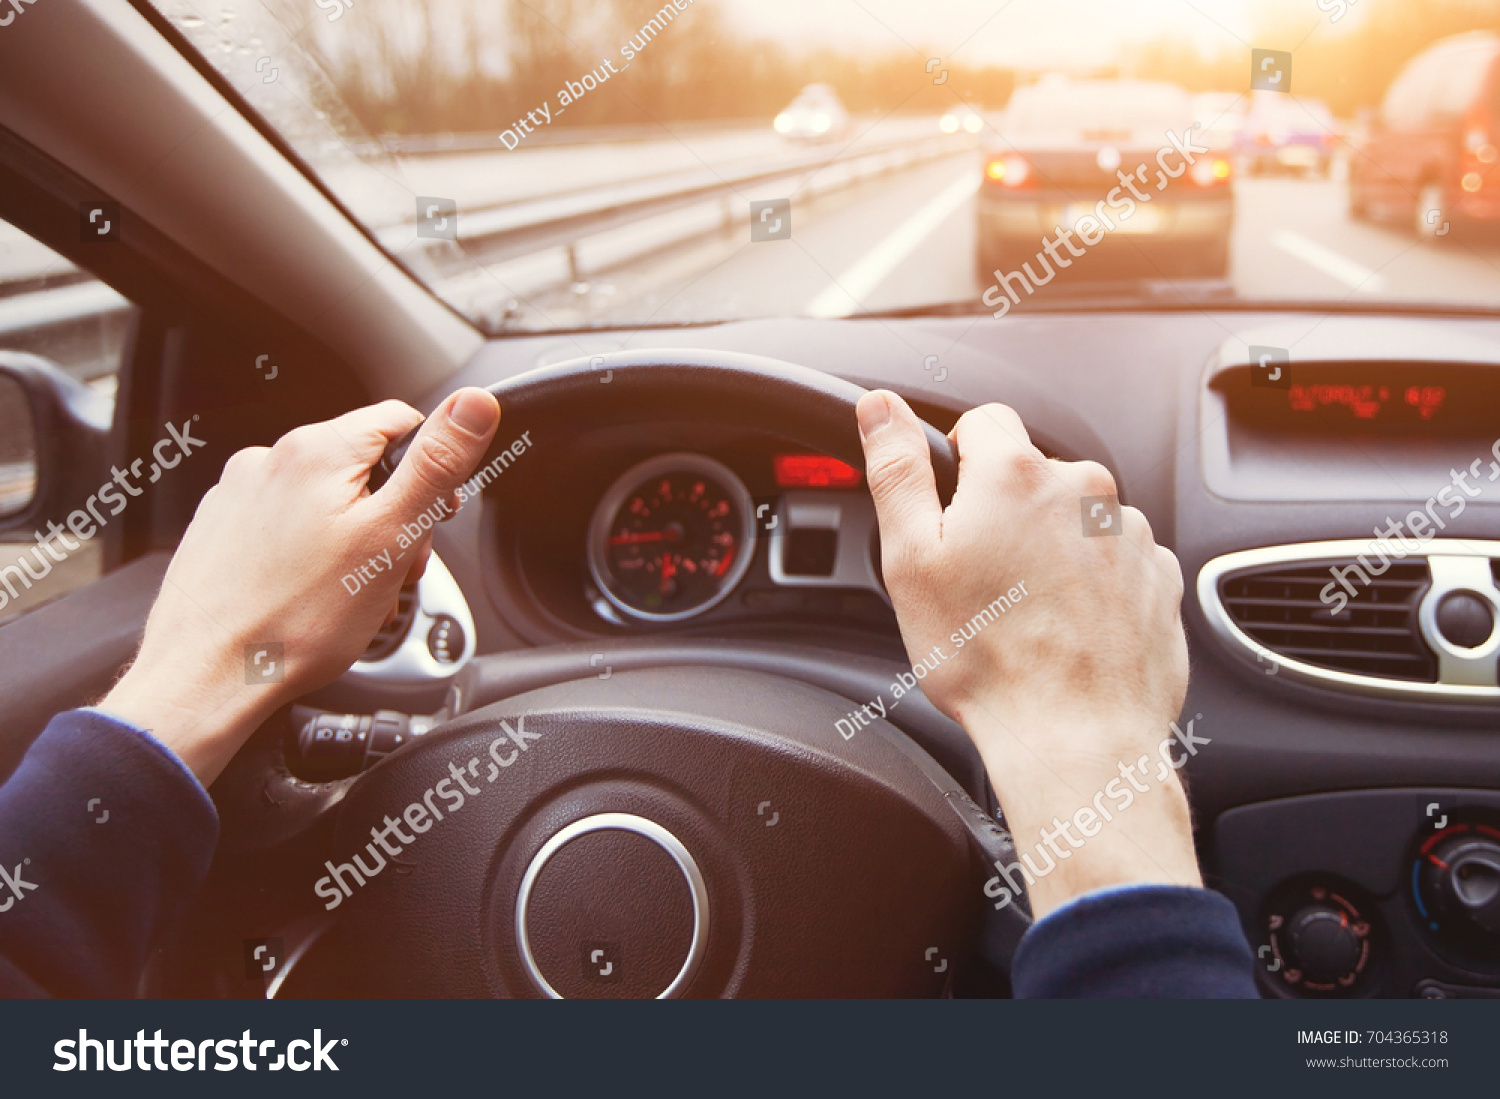 traffic jam, driving car on highway, close up of hands on steering wheel in sunny day #704365318